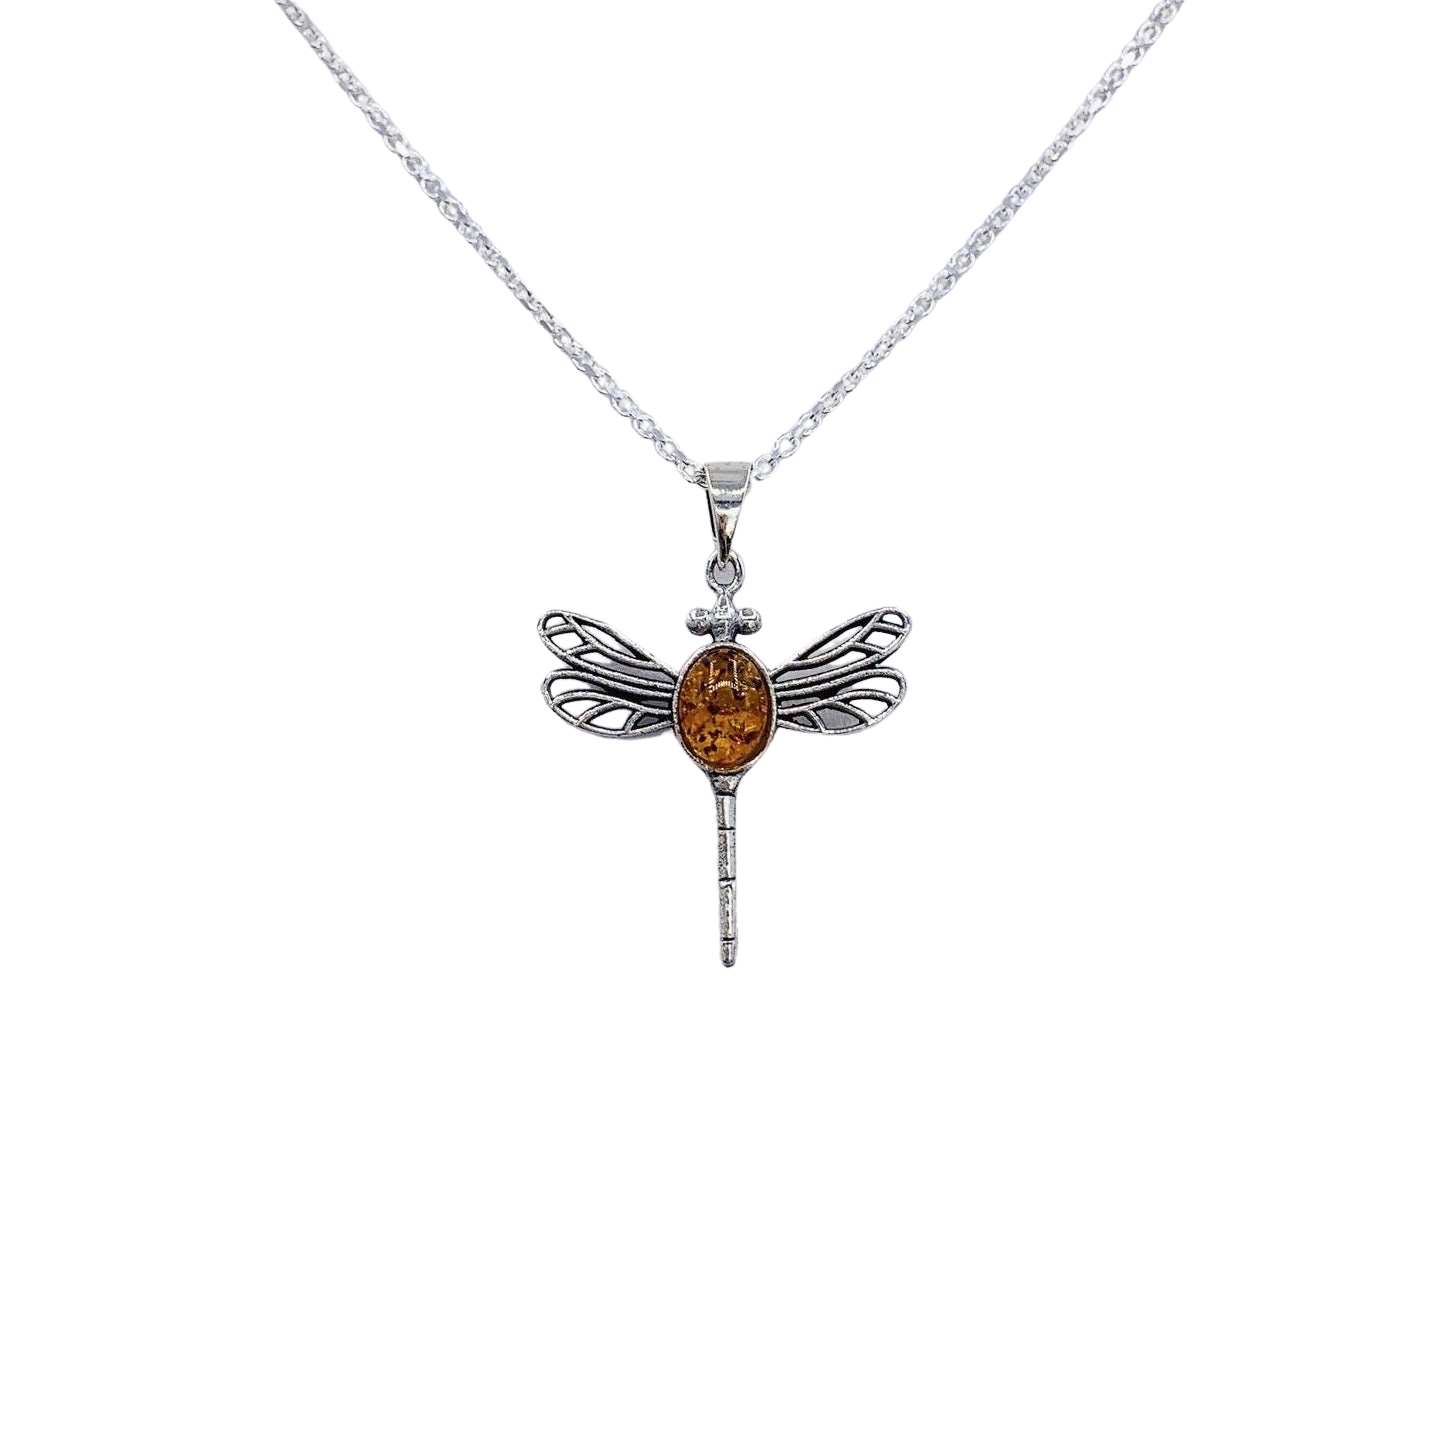 Amber Dragonfly Pendant Necklace with Amber Adjustable Sterling Chain